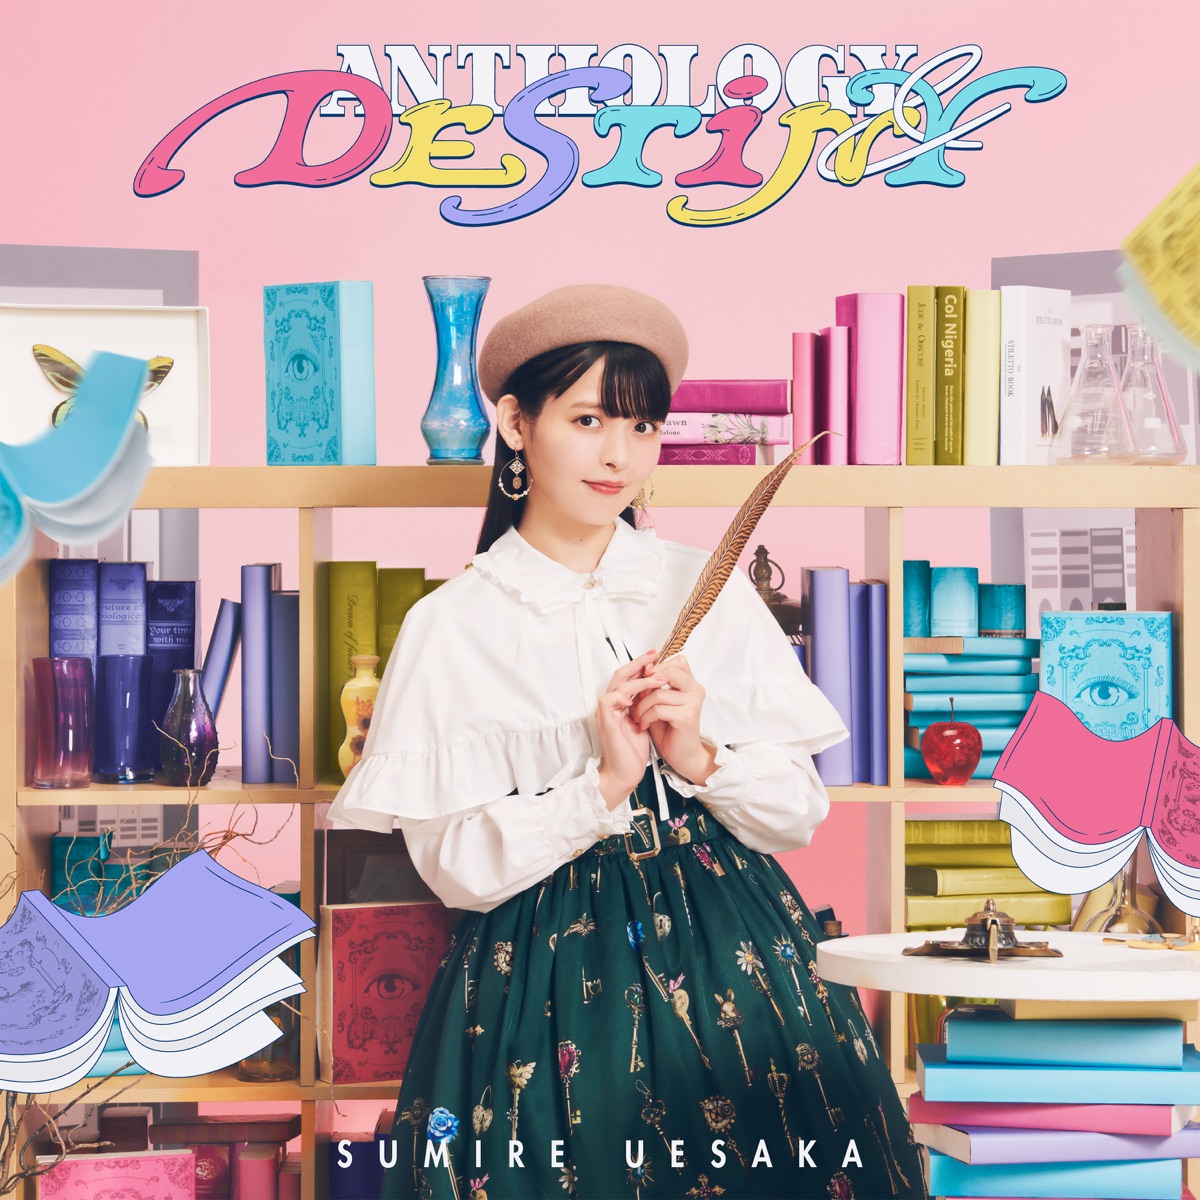 Cover art for『Sumire Uesaka - Kyoutaiaika』from the release『ANTHOLOGY & DESTINY』